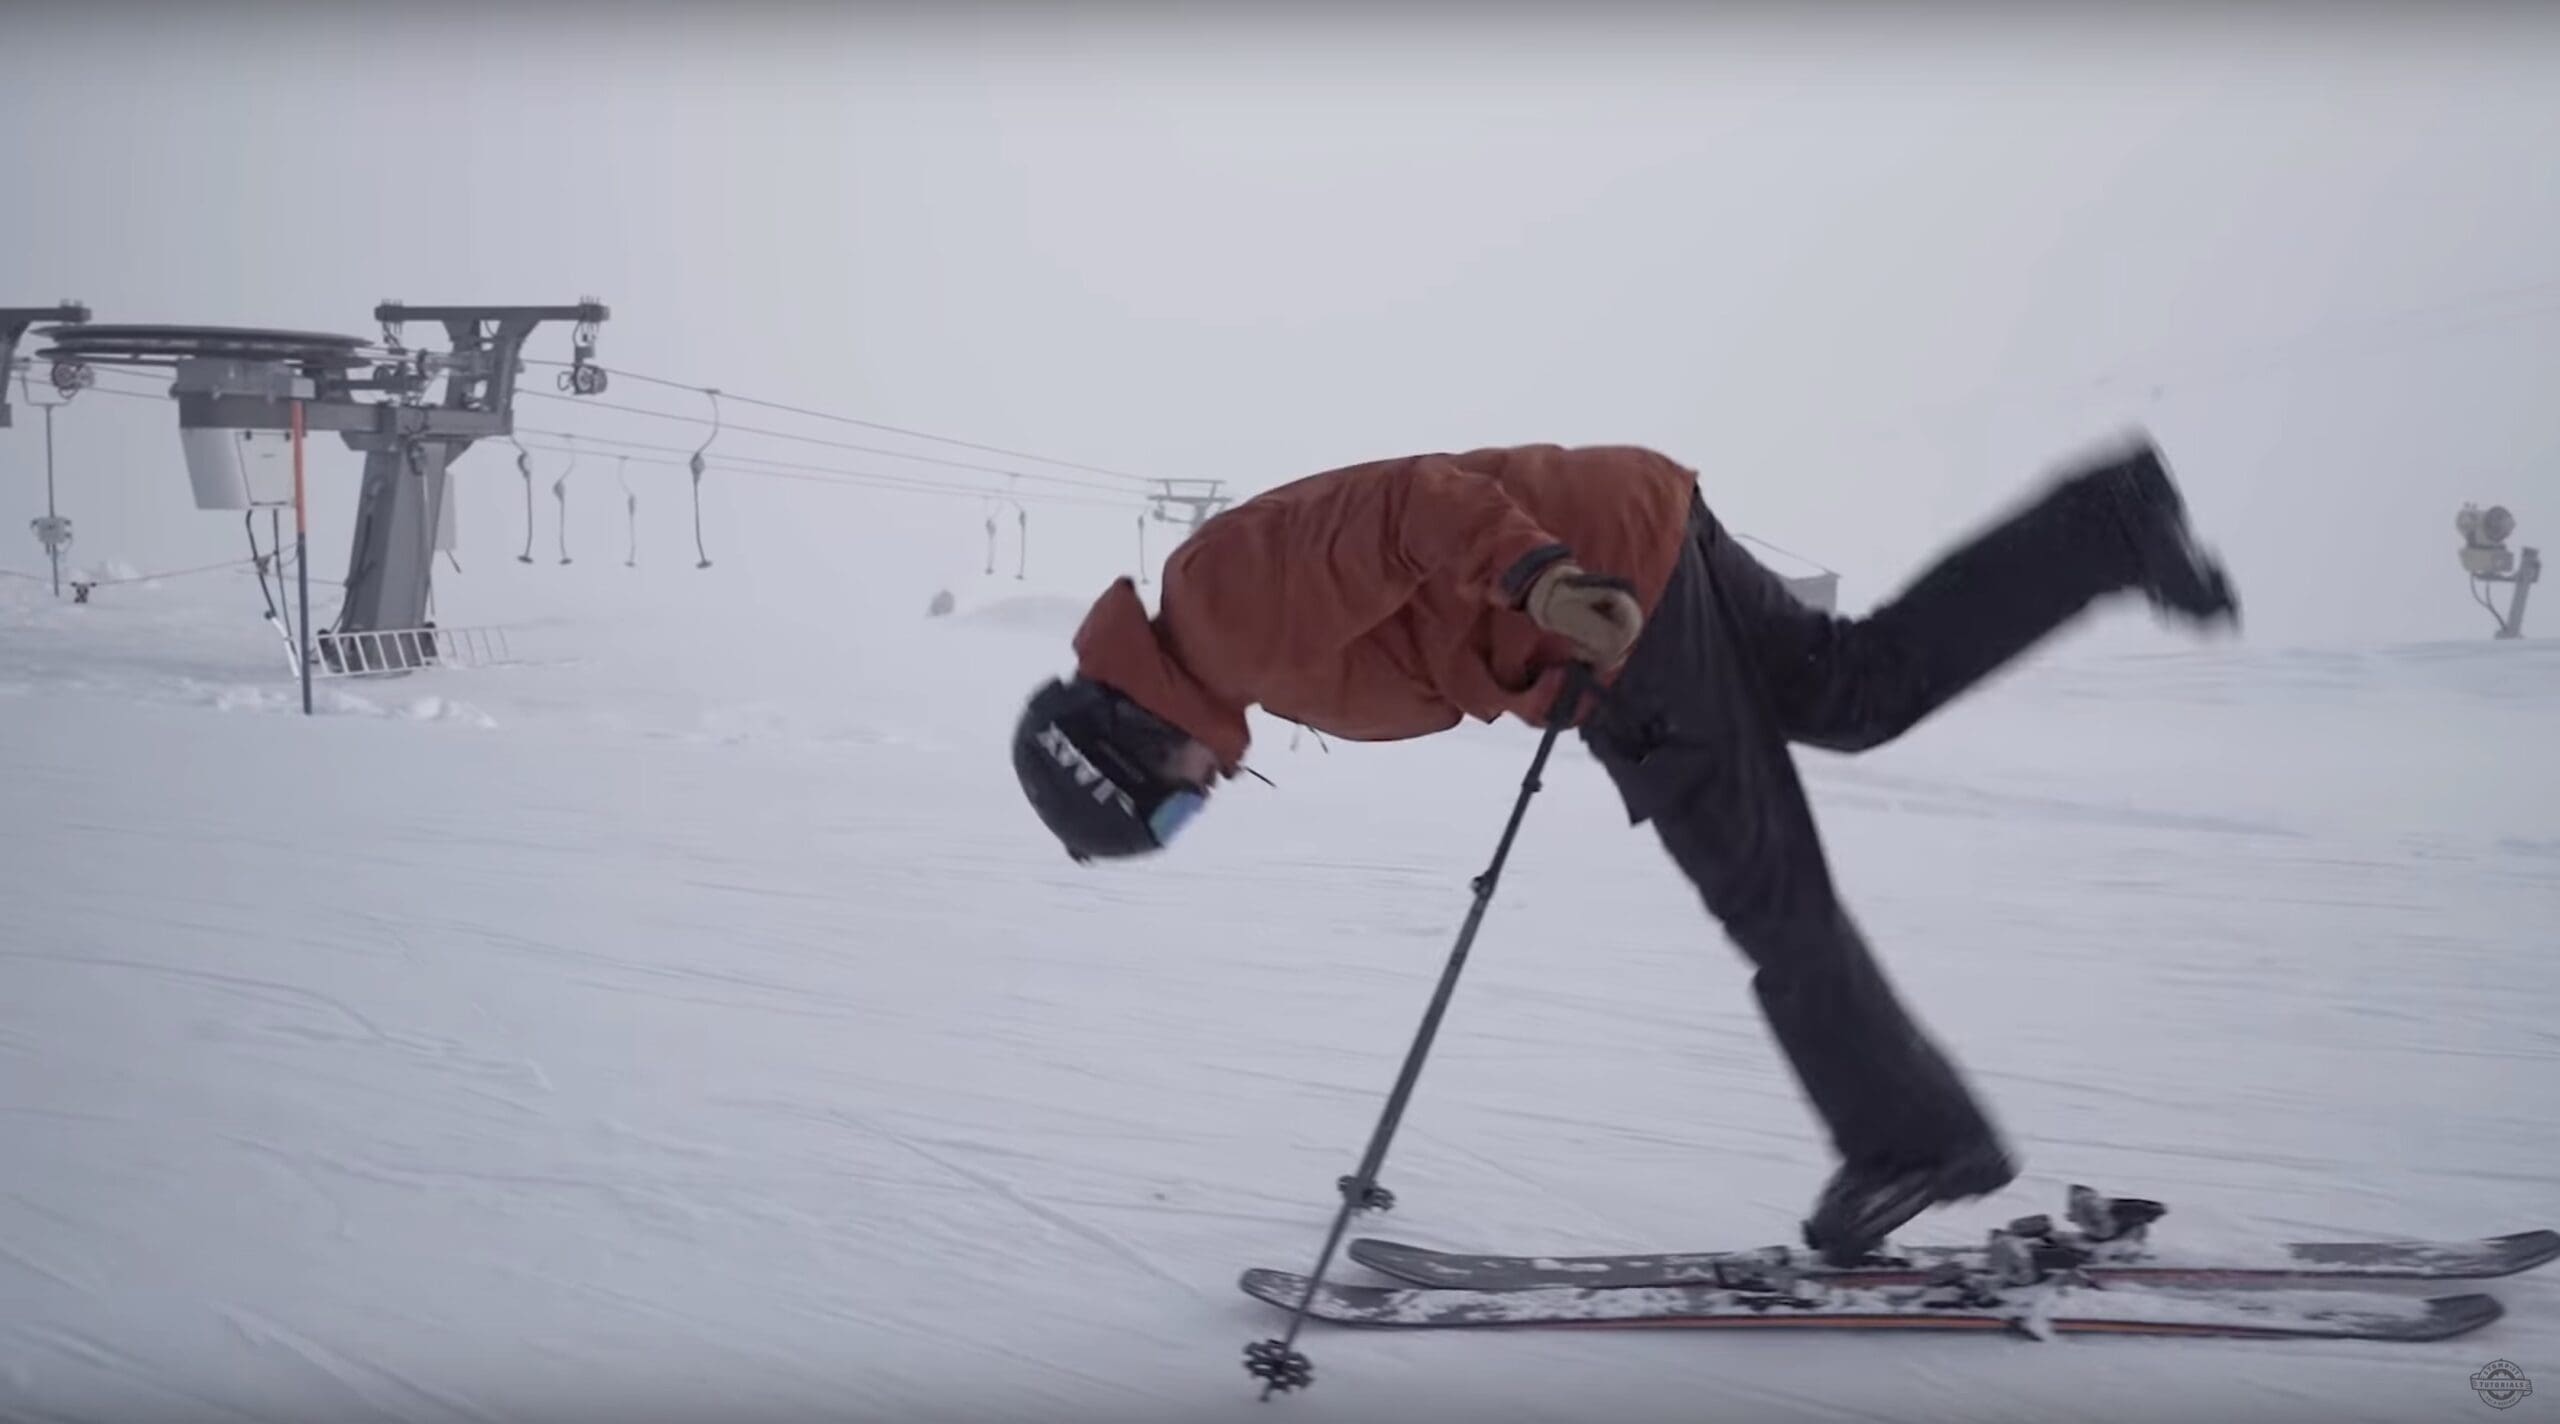 15 Easy Ski Tricks (That Aren’t That Easy) | Unofficial Networks